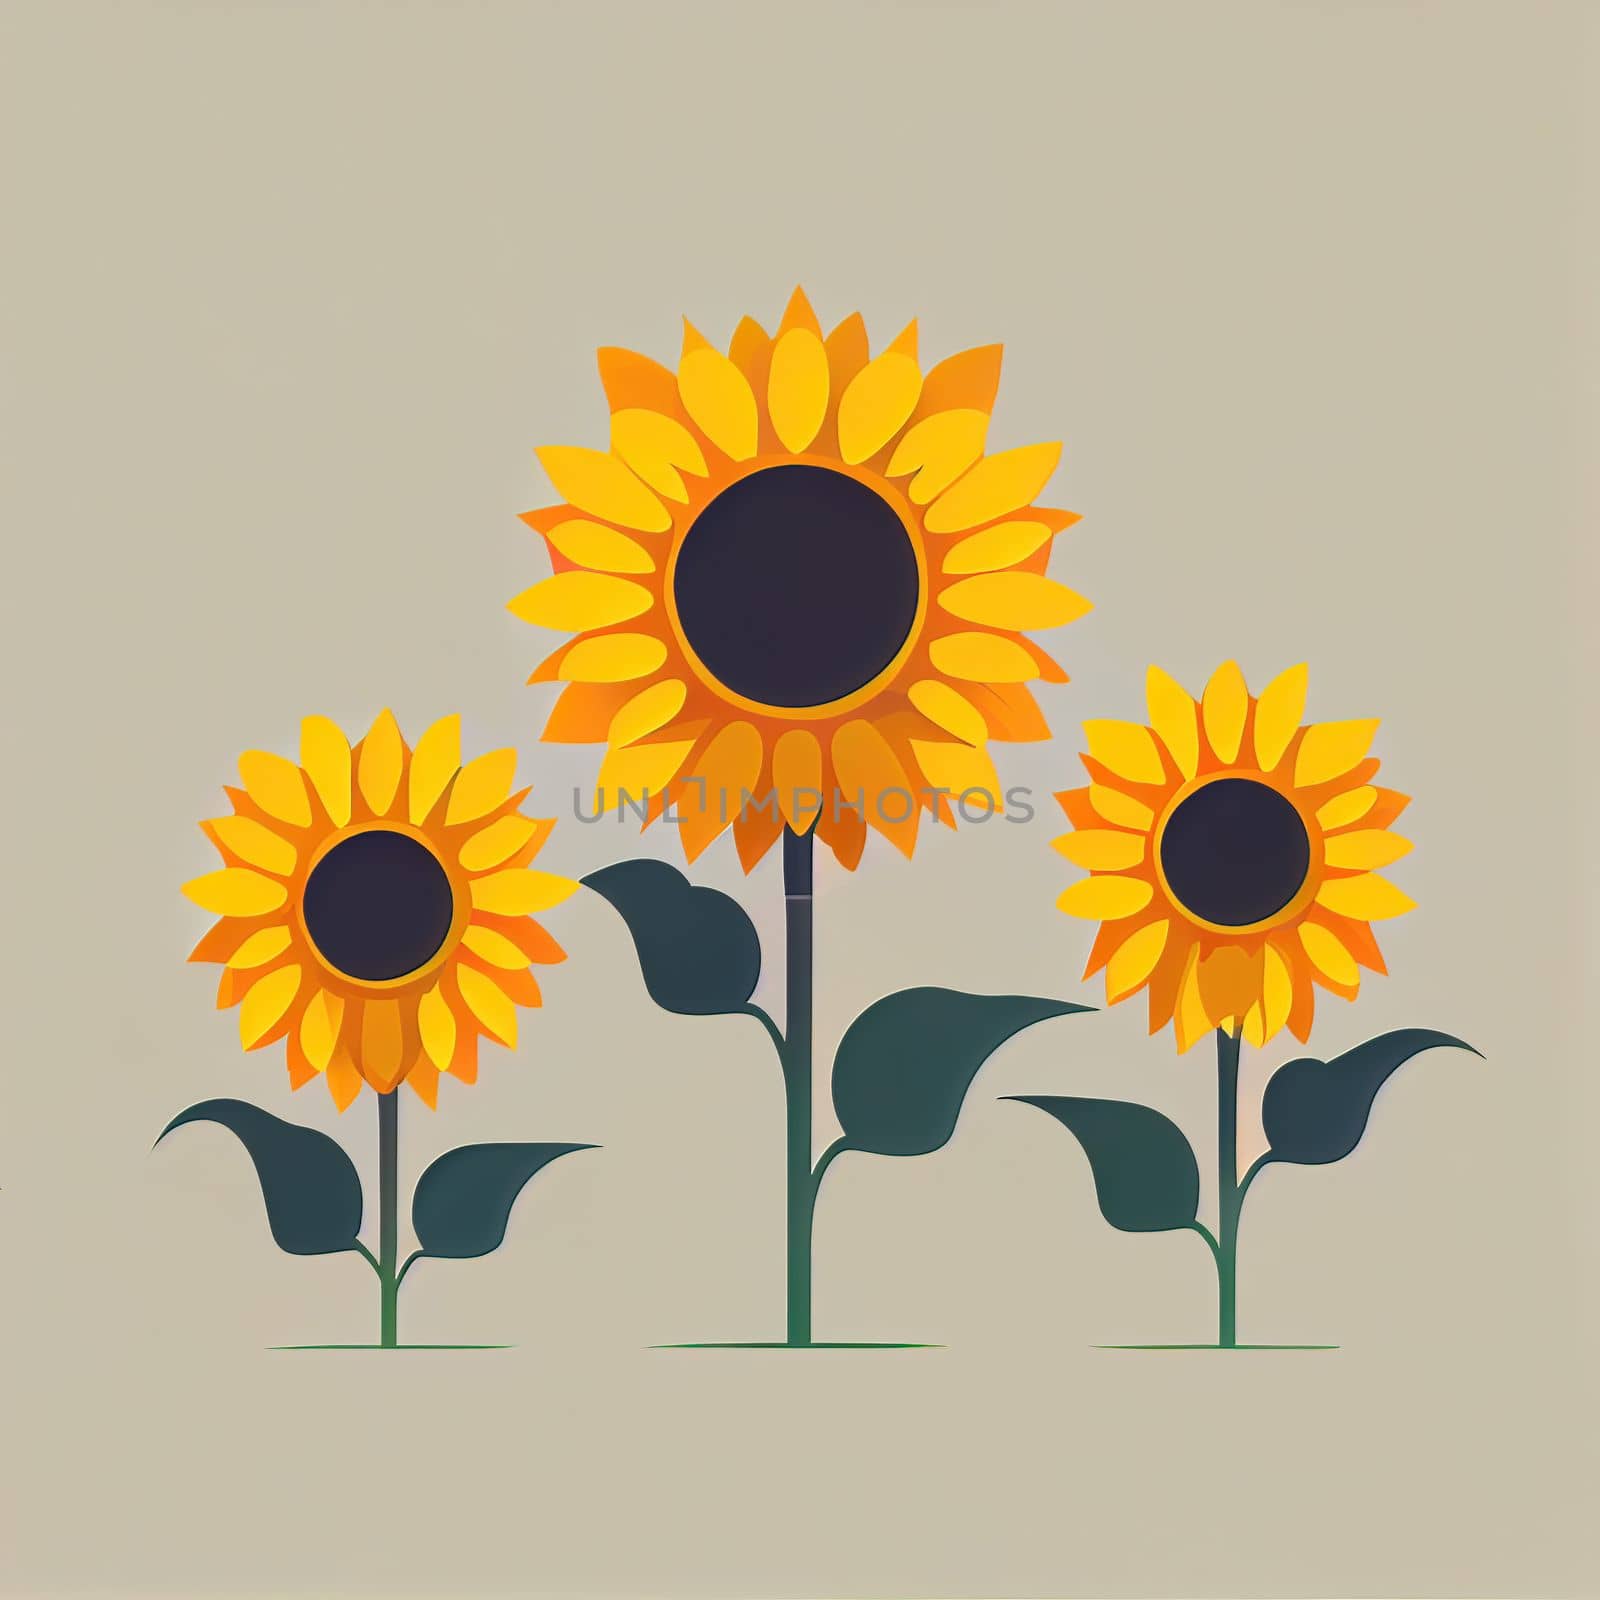 Simple icons of spring flowers. Sunflowers for Valentine's day isolated background by FokasuArt